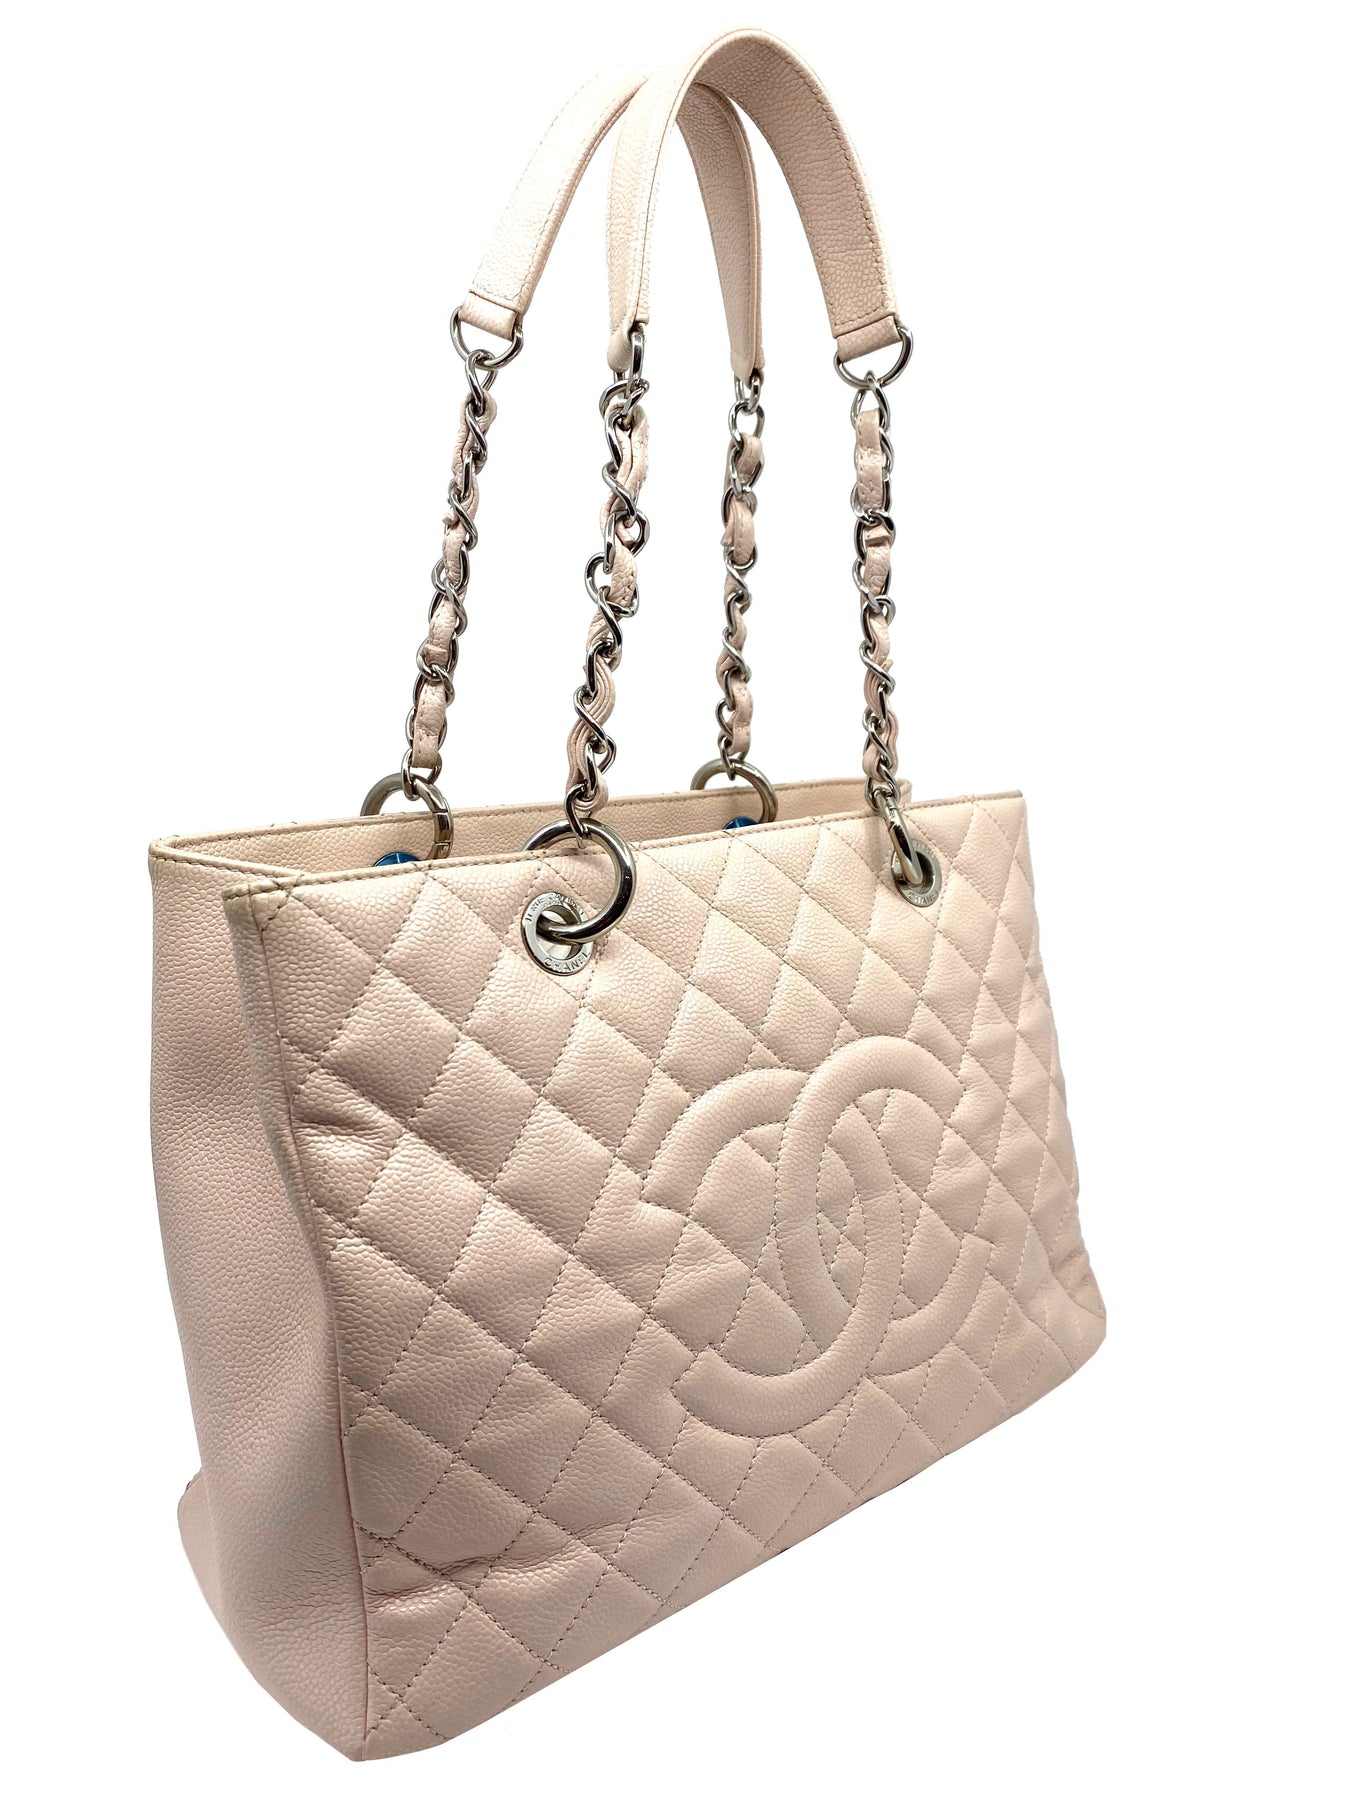 CHANEL, Bags, Chanel Caviar Quilted Grand Shopping Tote Gst Coral Bag